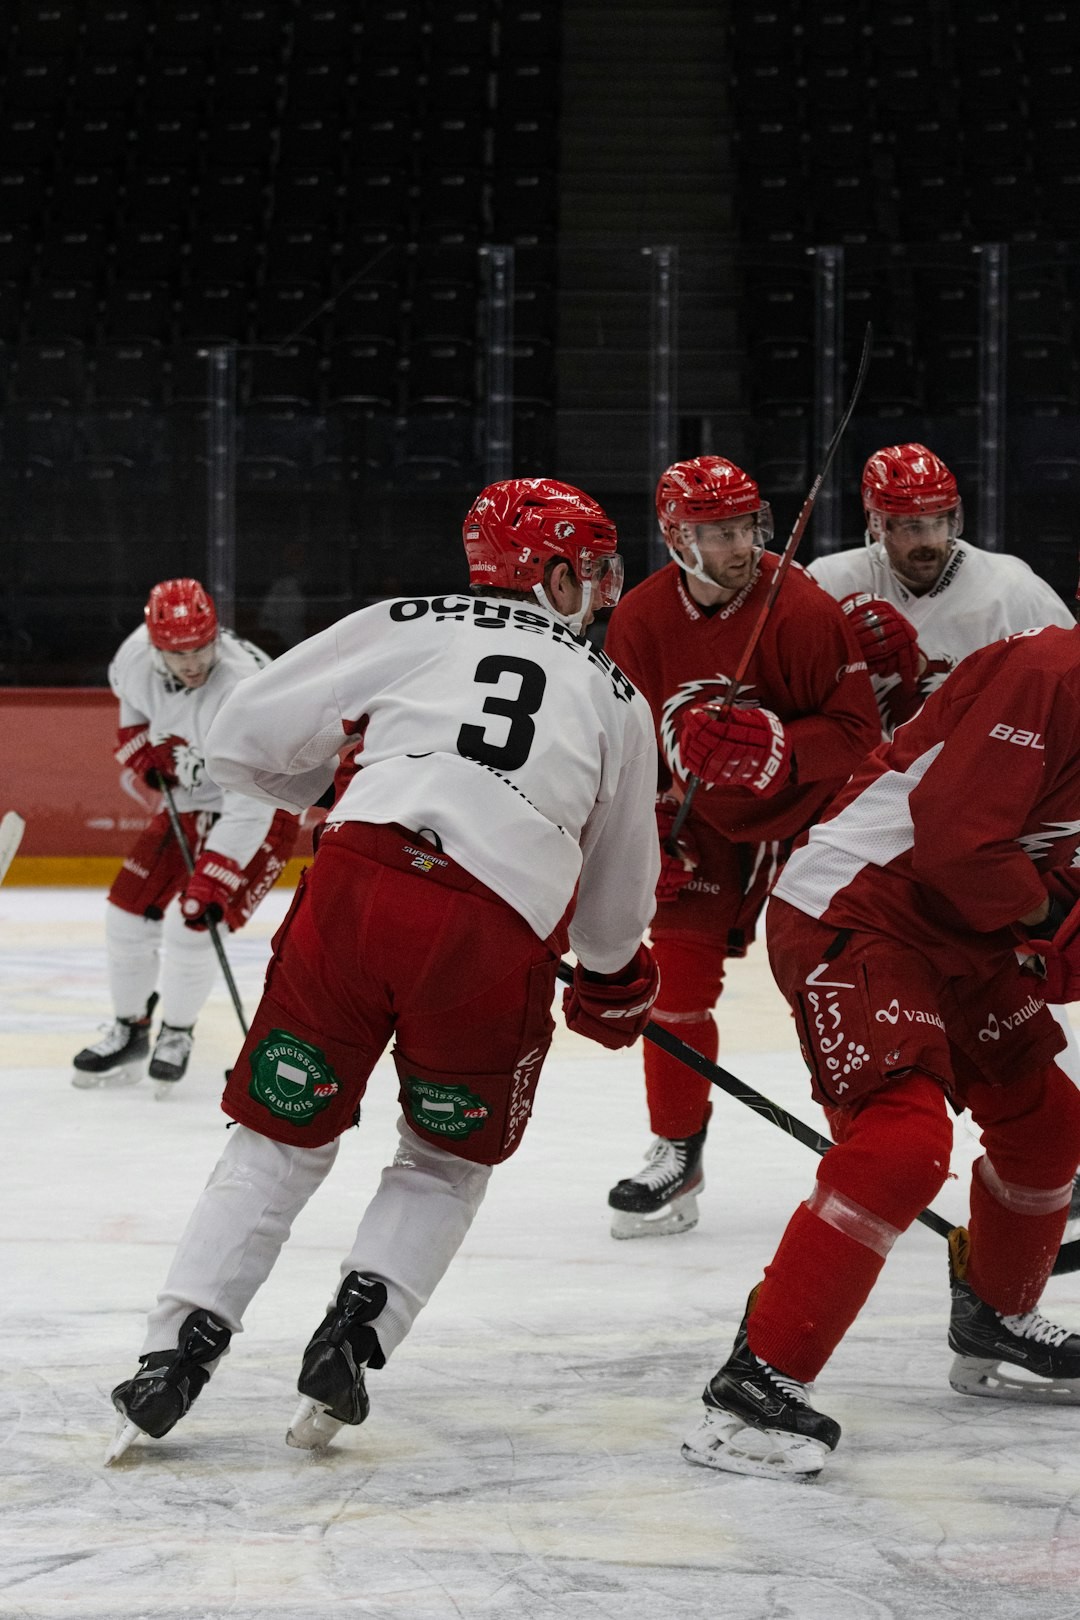 a group of men playing a game of ice hockey